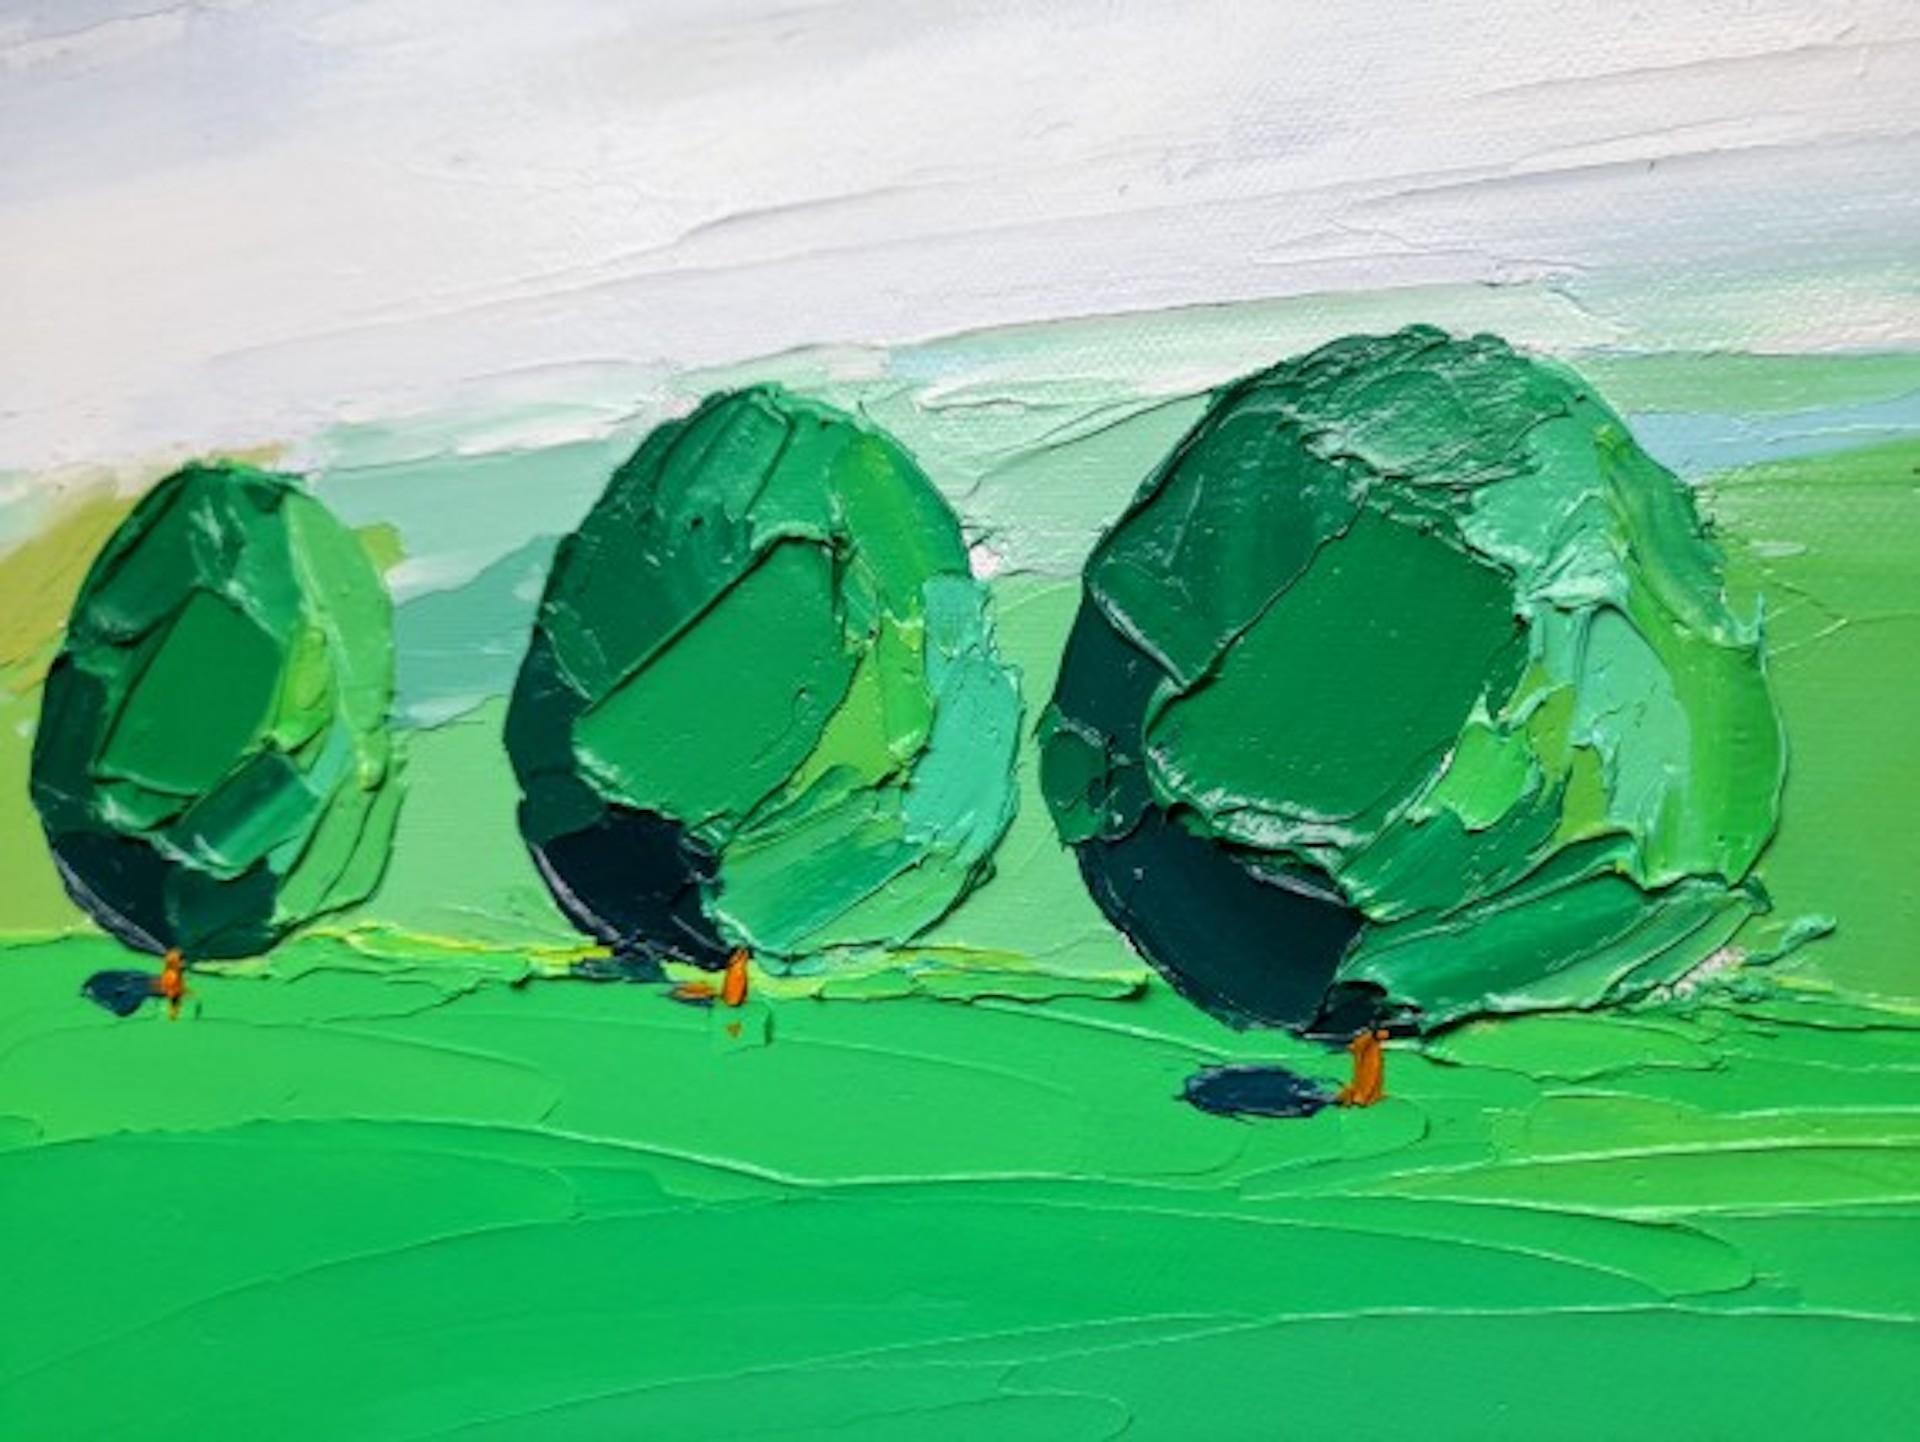 Green Trees, Cotswolds [2020]
Original
Landscape
Oil paint on canvas
Canvas Size: H:50 cm x W:55 cm x D:2cm
Sold Unframed
Please note that insitu images are purely an indication of how a piece may look

'Green Trees’ is an original oil painting by